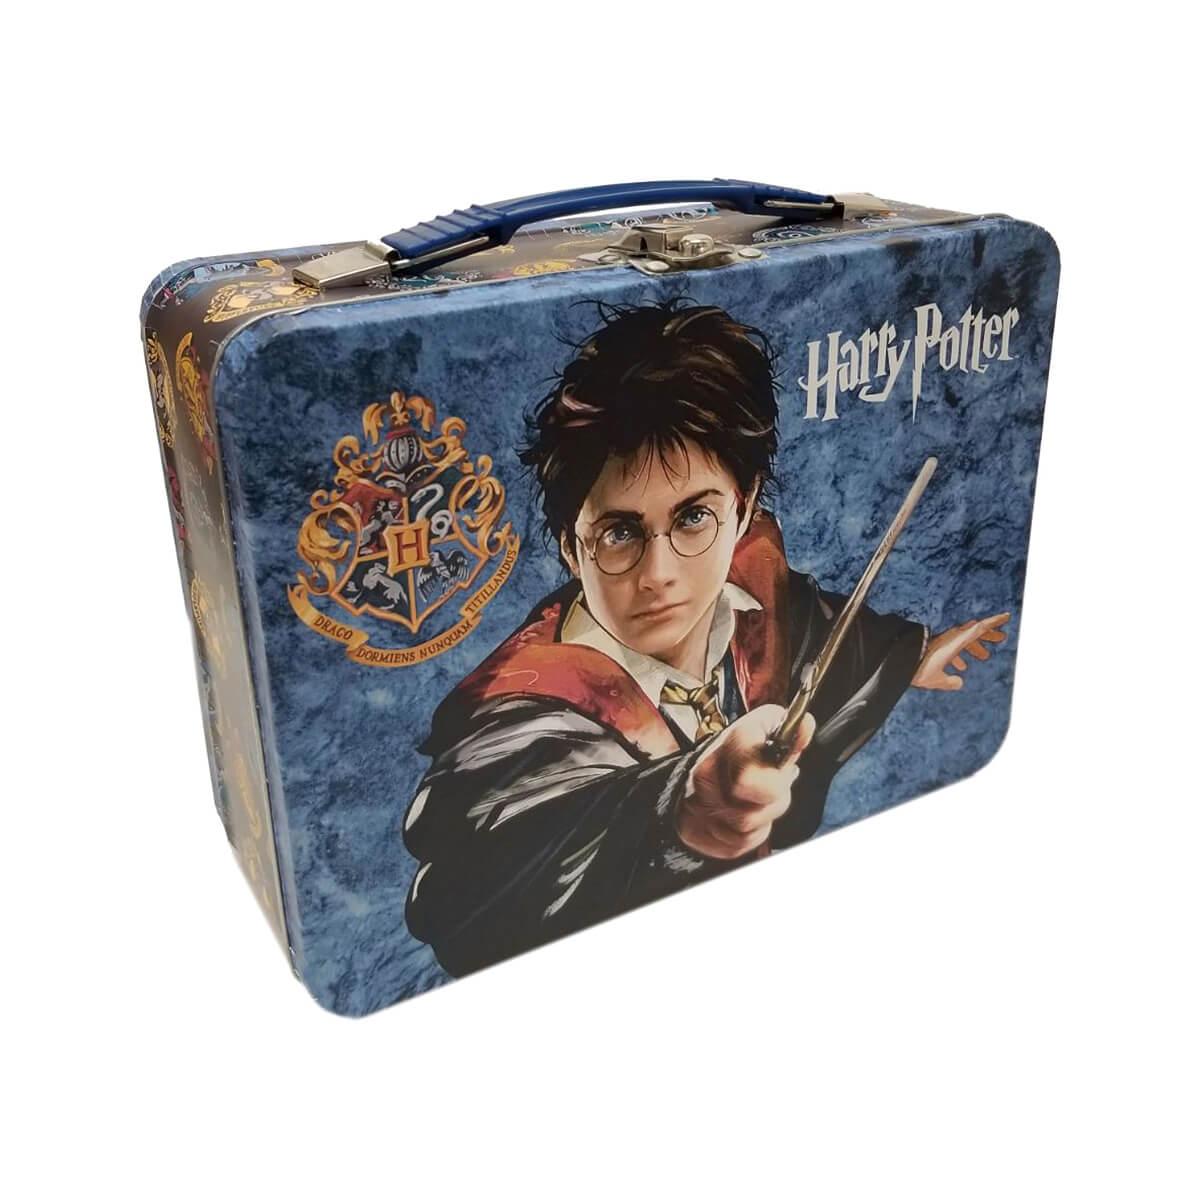  Harry Potter Xl Classic Lunchbox